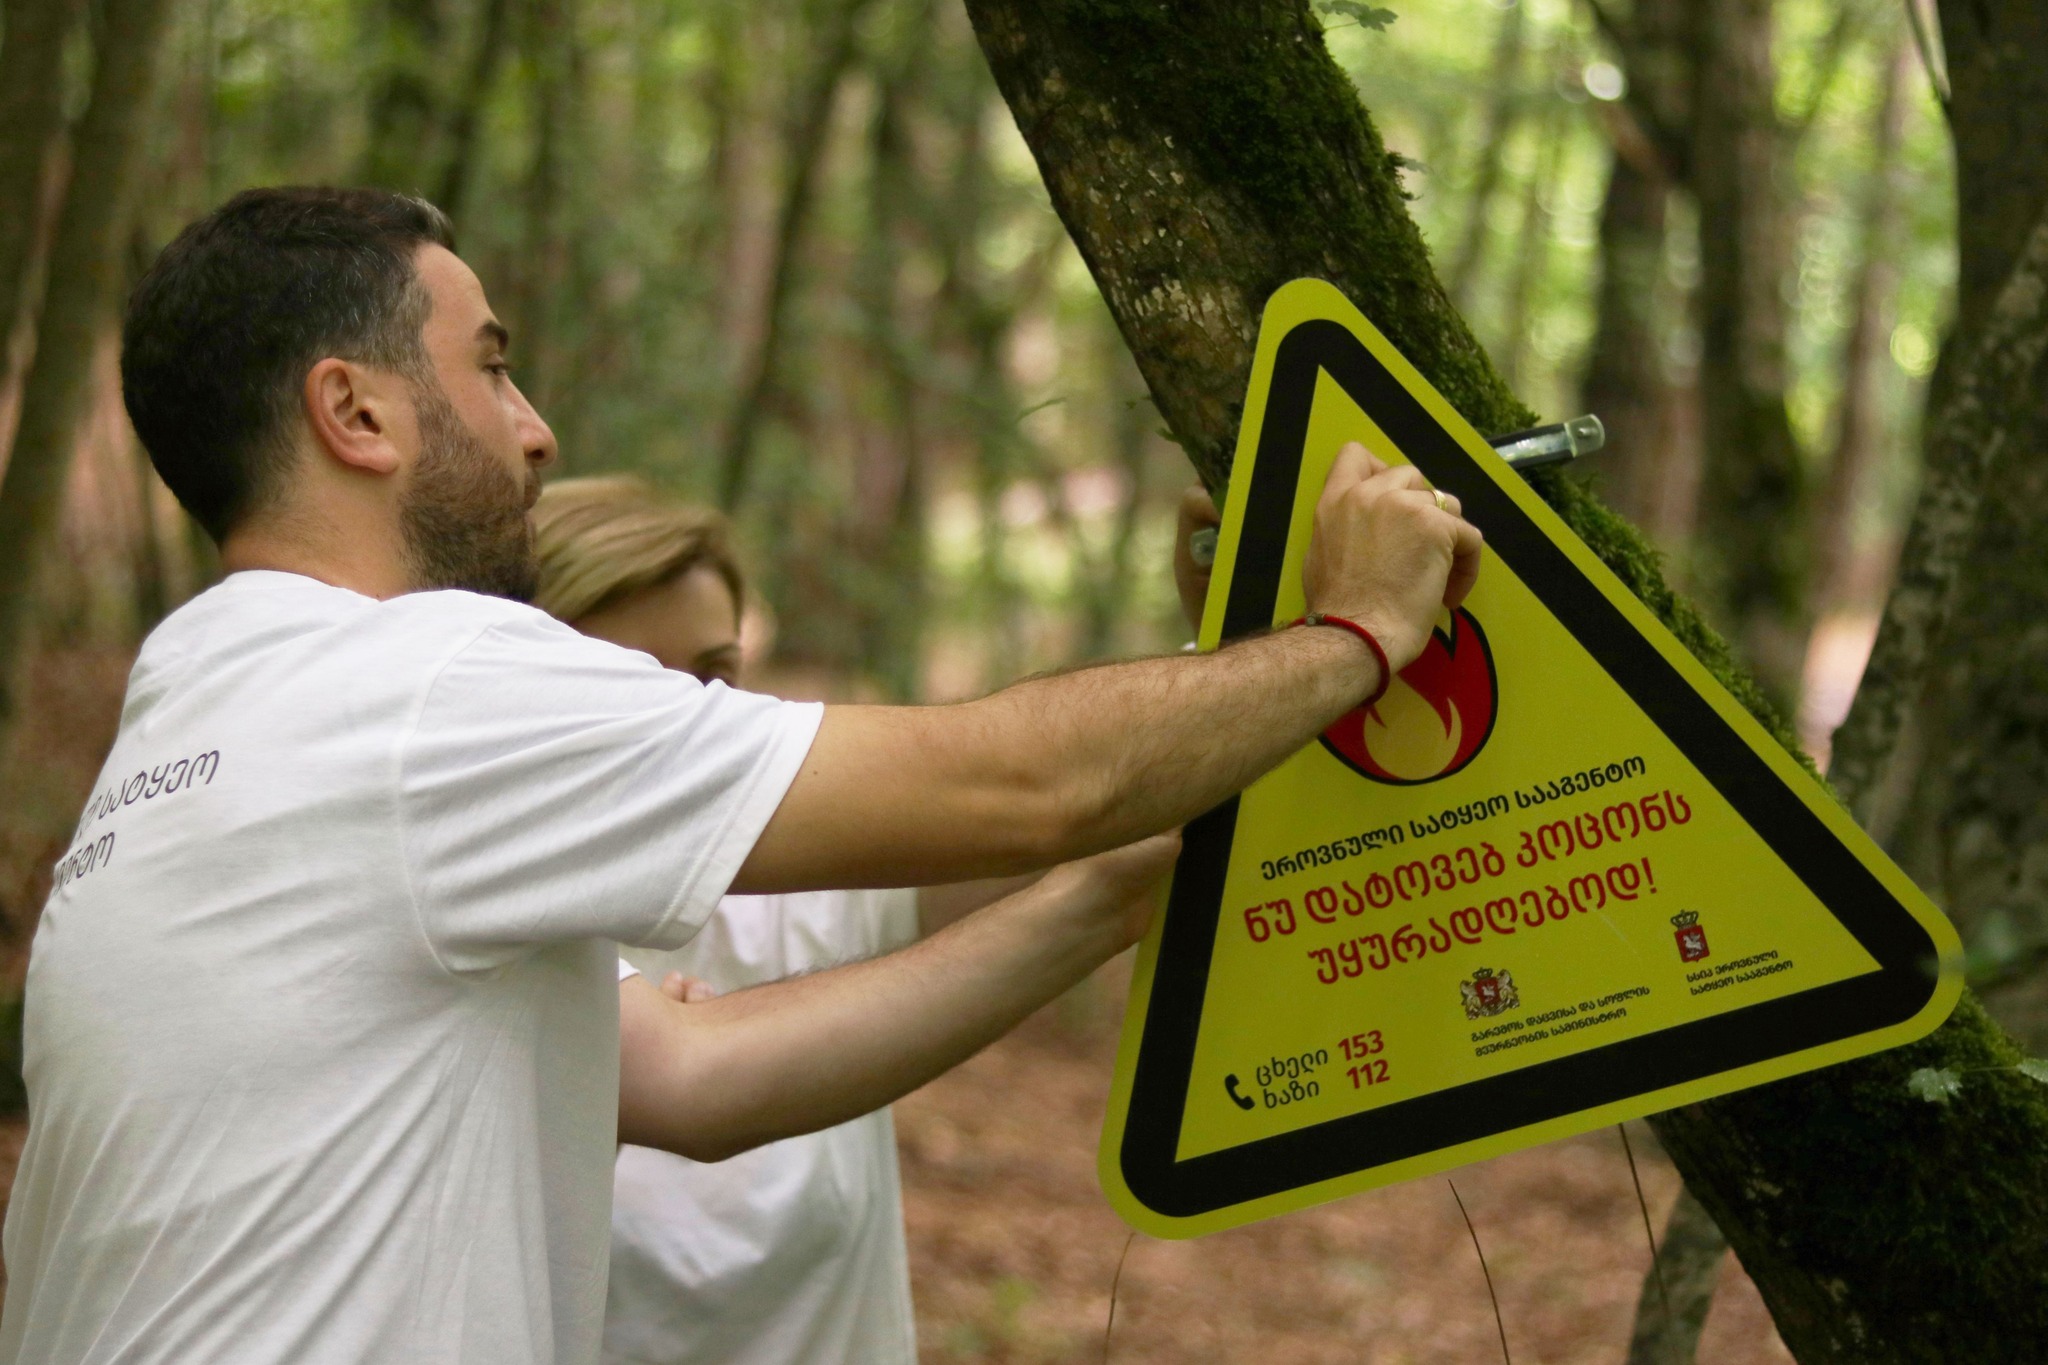 Do not leave the fire unattended! Warning signs in forest edges